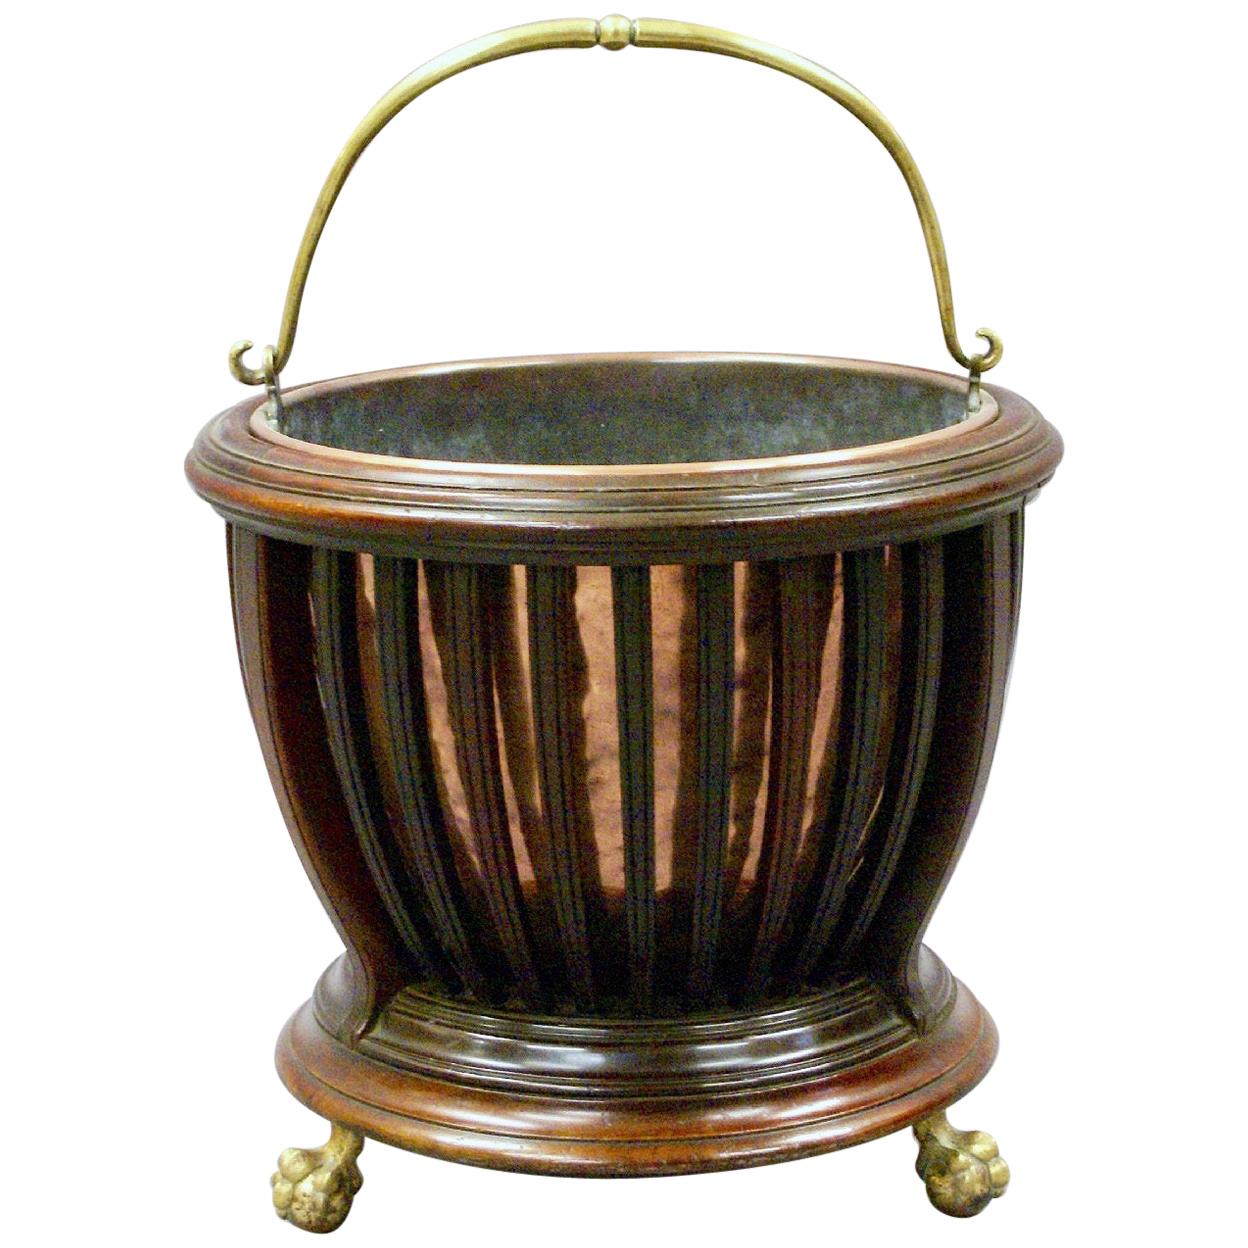 This very attractive Edwardian mahogany bucket features a slatted body design to show a polished copper liner with a brass handle. The bucket stands on brass ball and claw feet and bears the maker’s name ‘Raleigh’ with the registered design number